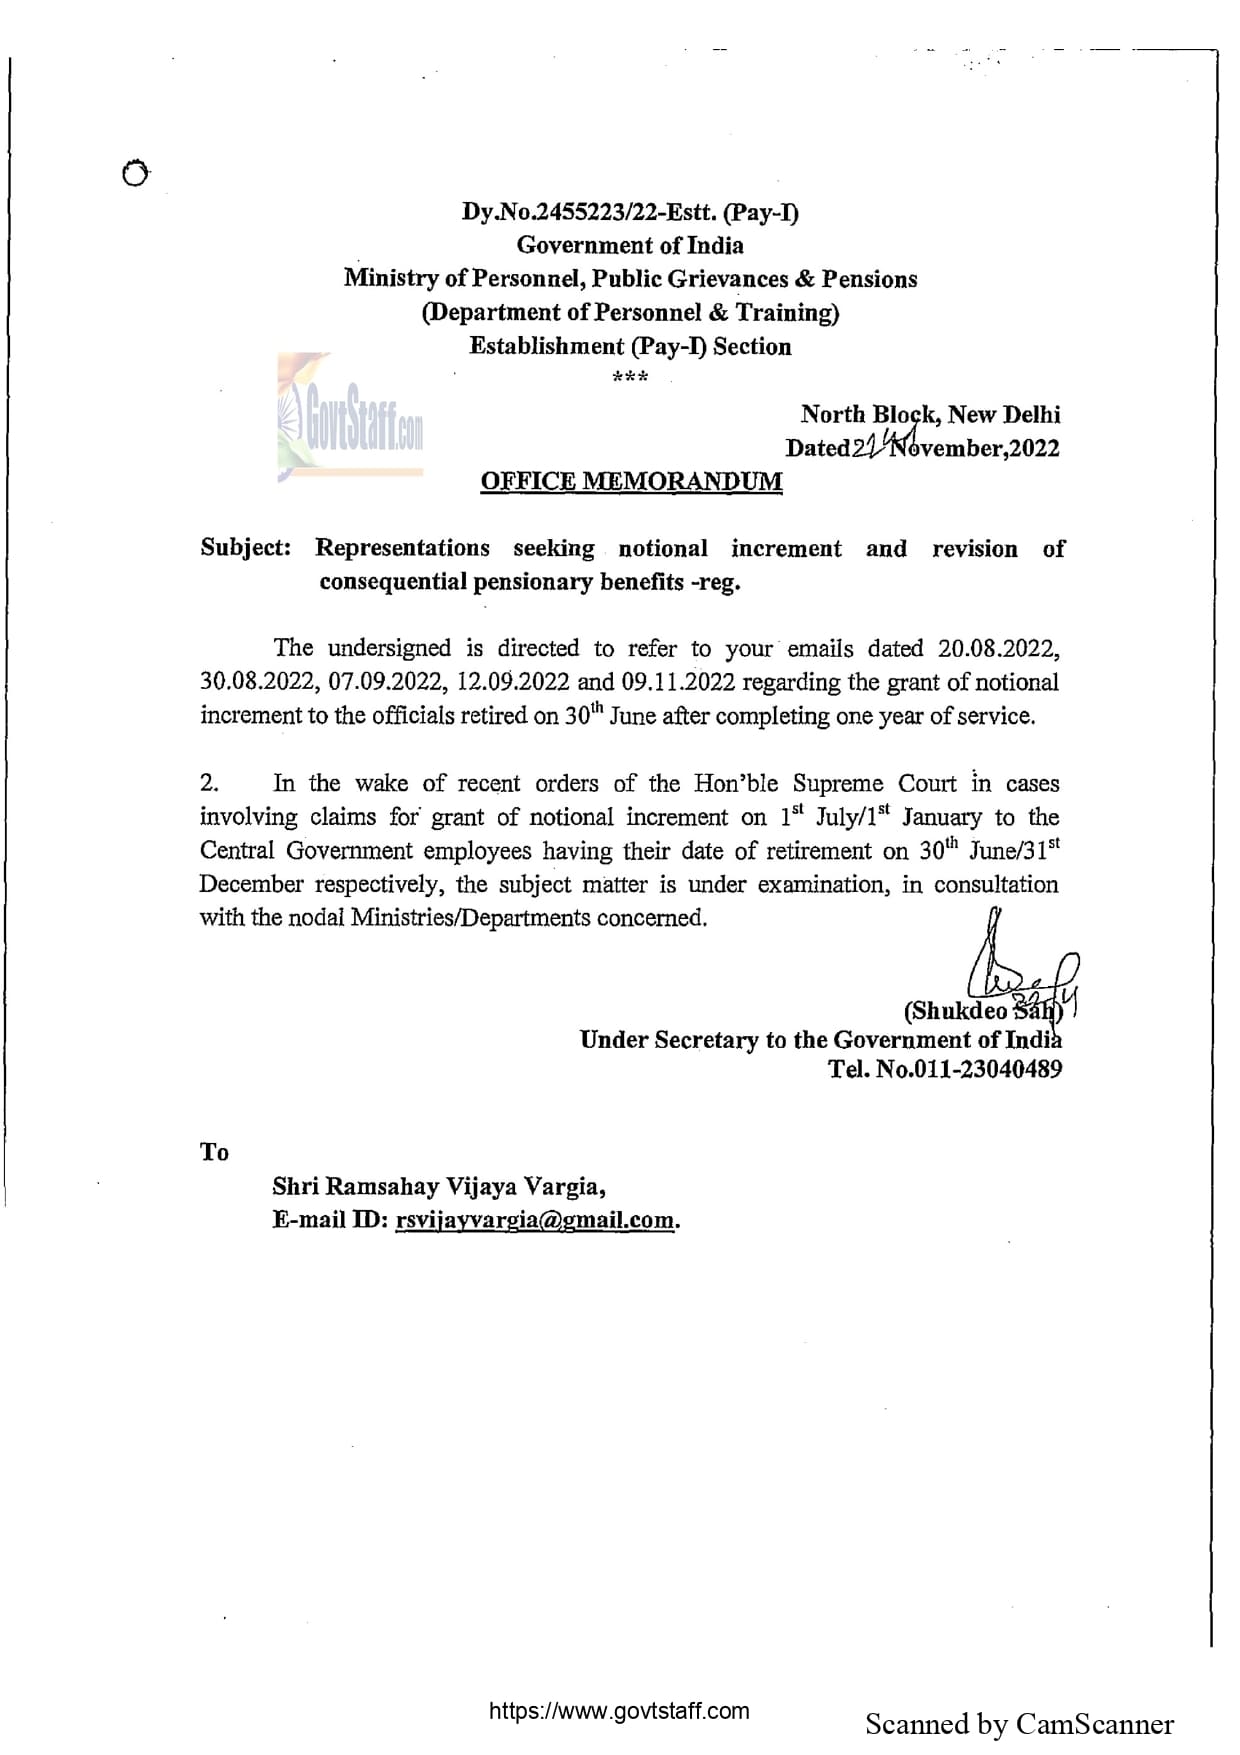 Notional increment and revision of consequential pensionary benefits to the officials retired on 30th June or 31st December after completing one year of service – Clarification by DoPT on representations